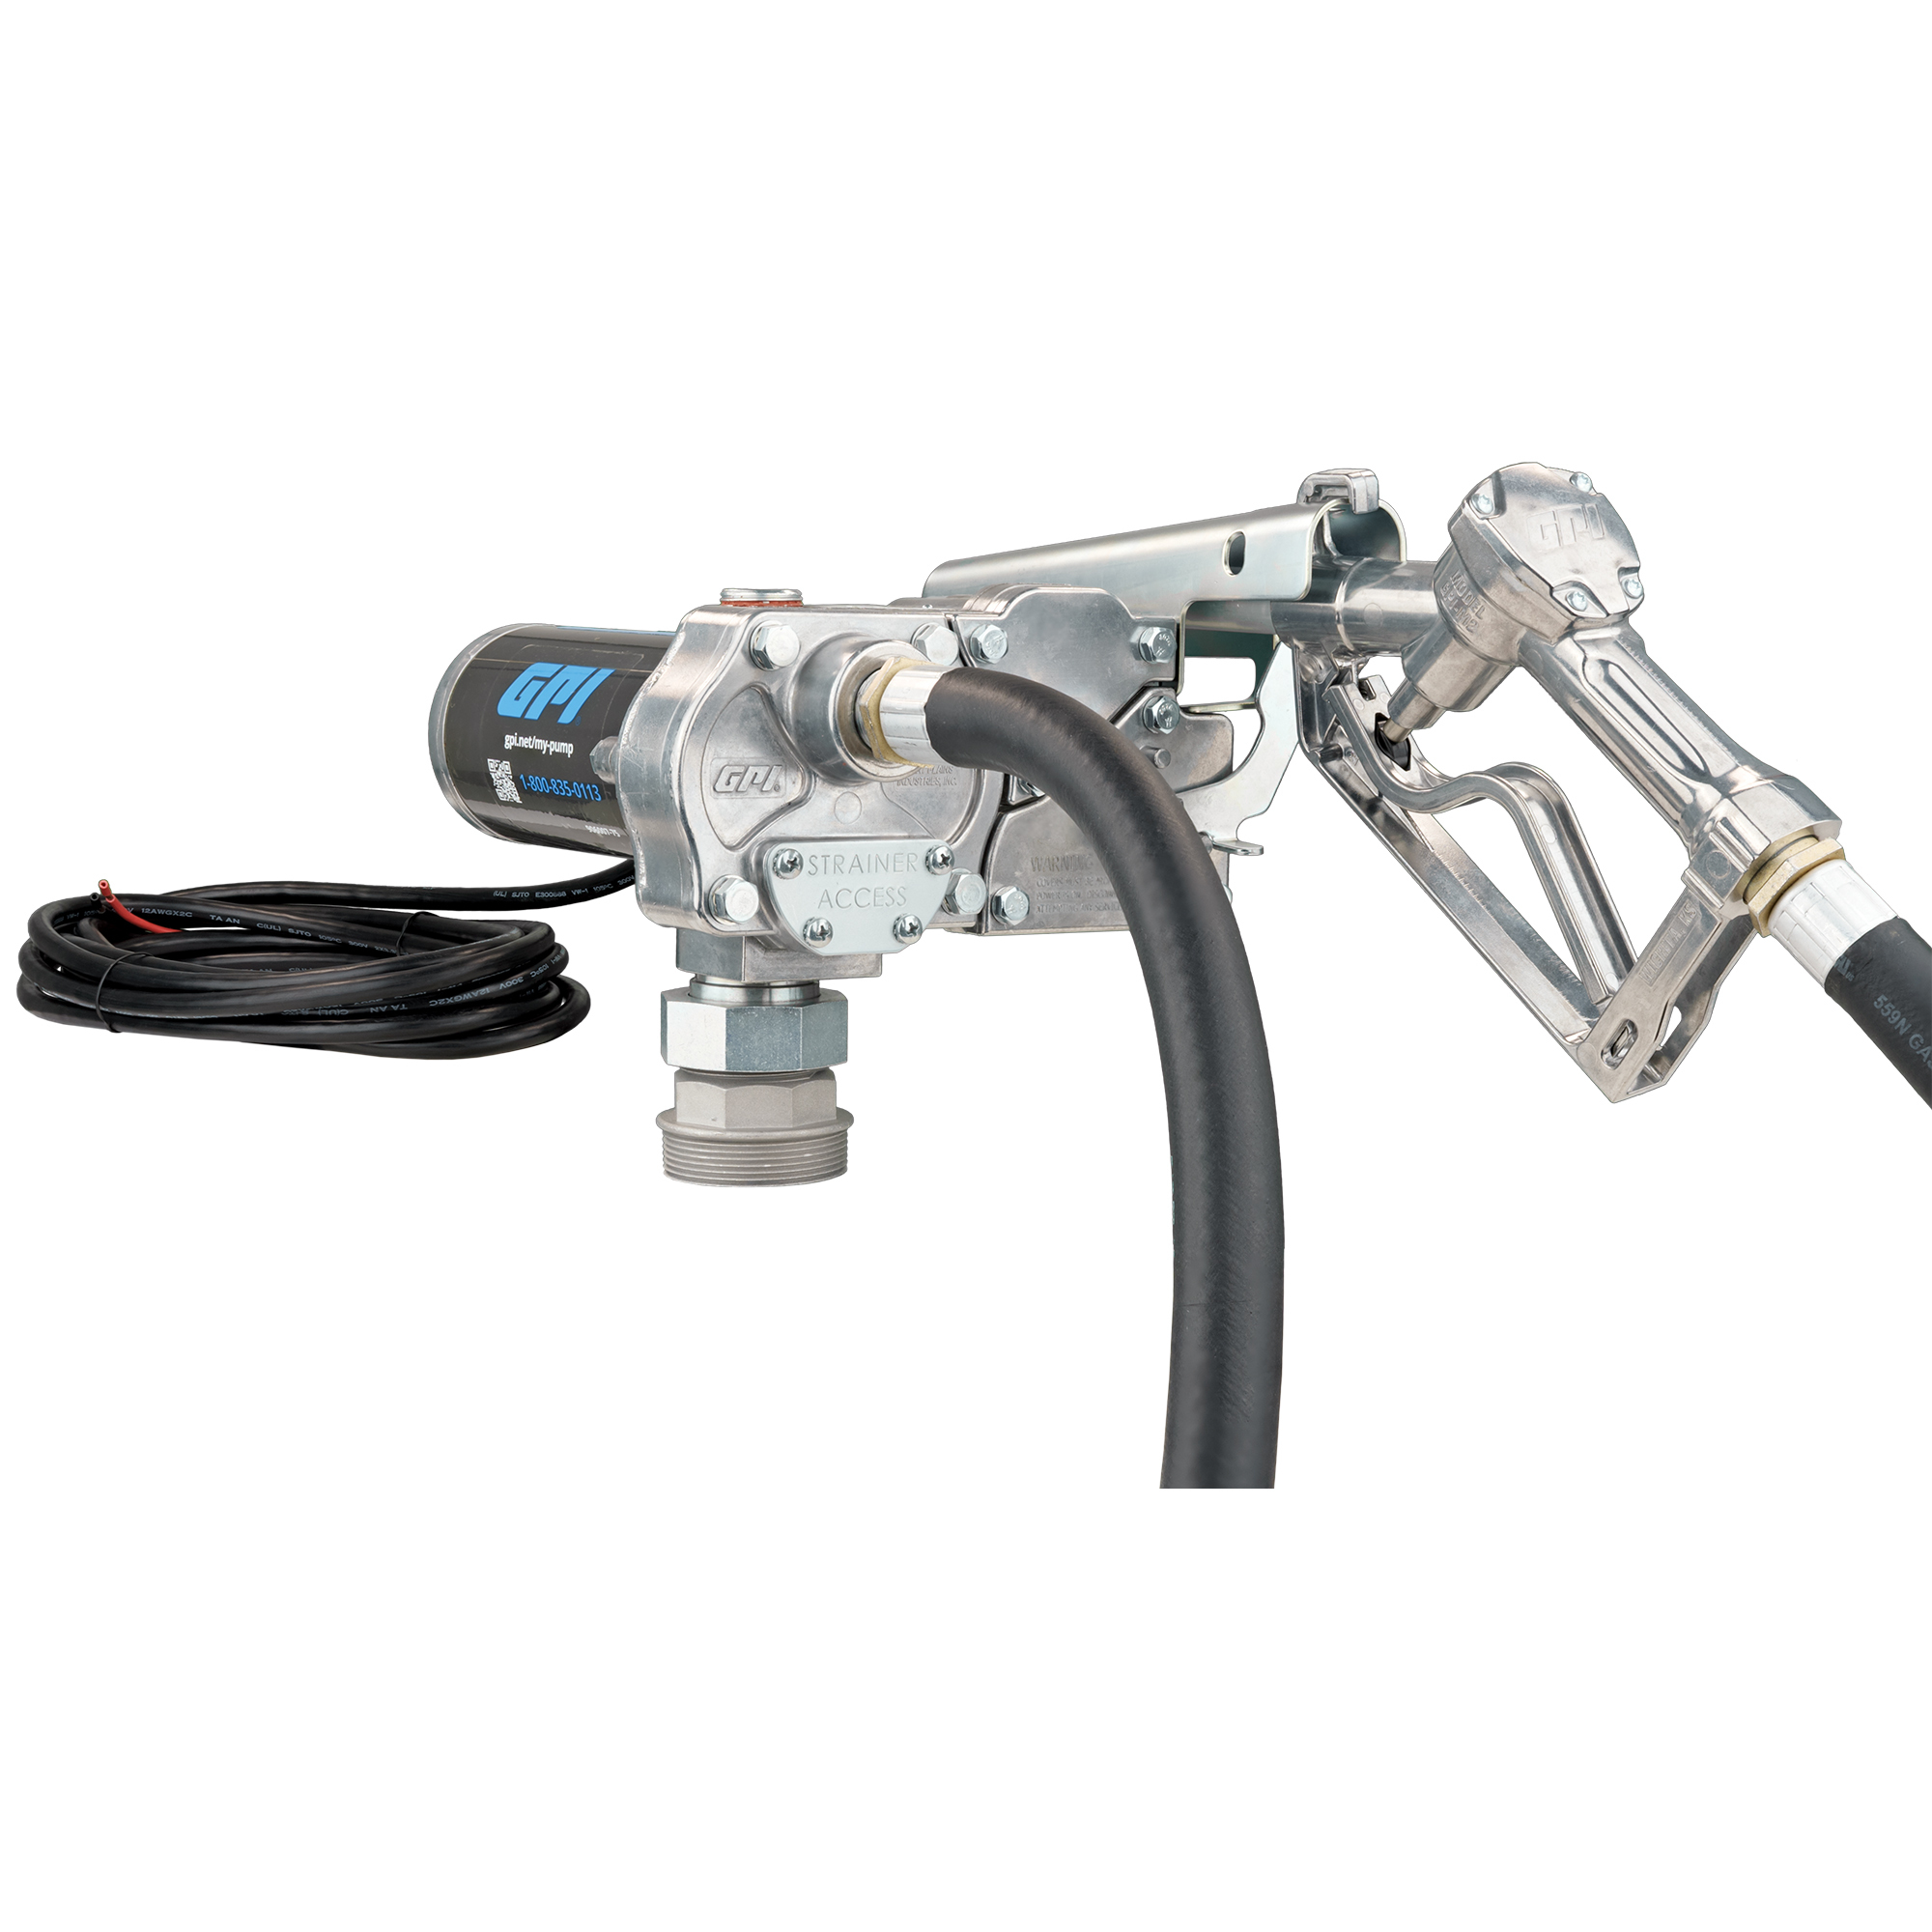 GPI 12V Fuel Transfer Pump with Spin Collar, 15 GPM, Manual Nozzle, Hose, Model M150S-MU